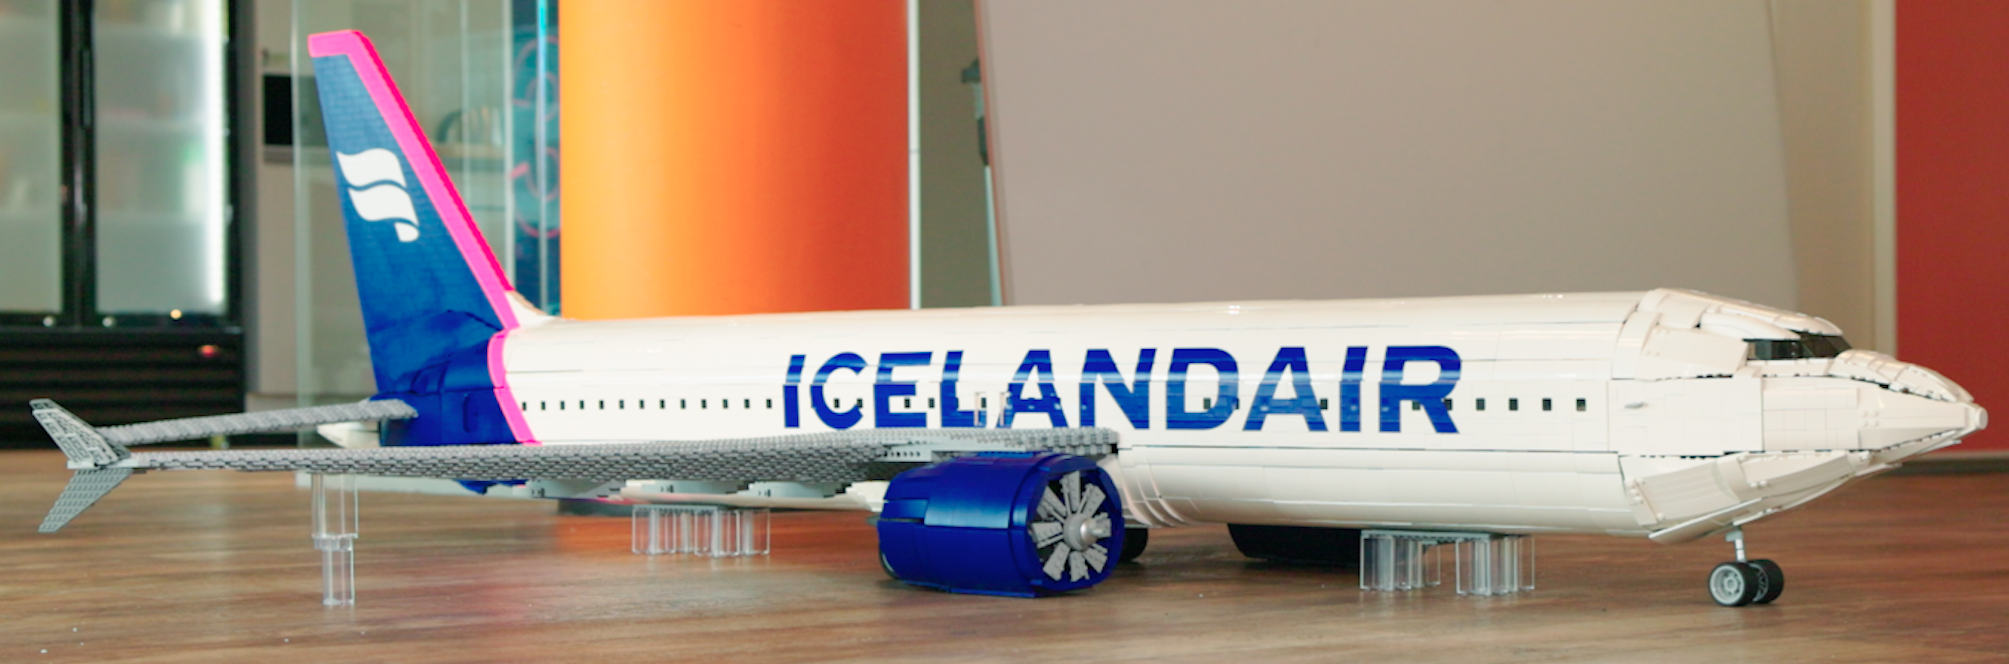 Icelandair plane made from LEGO bricks, with Icelandair livery and pink tail stripe